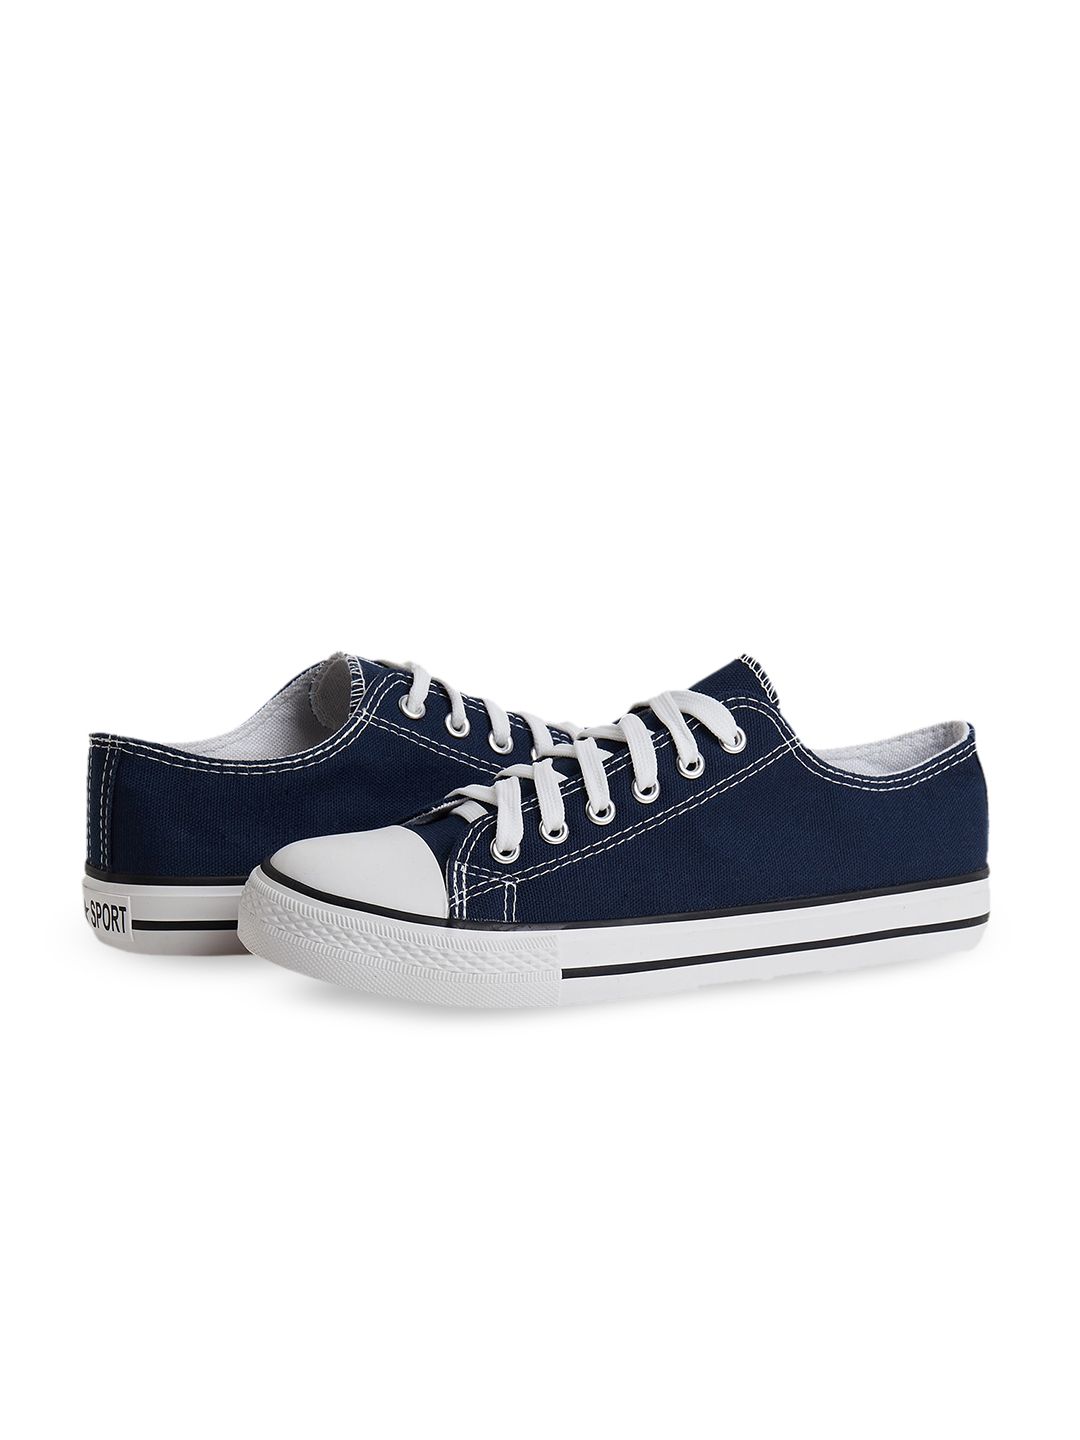 MOZAFIA Women Navy Blue Sneakers Price in India